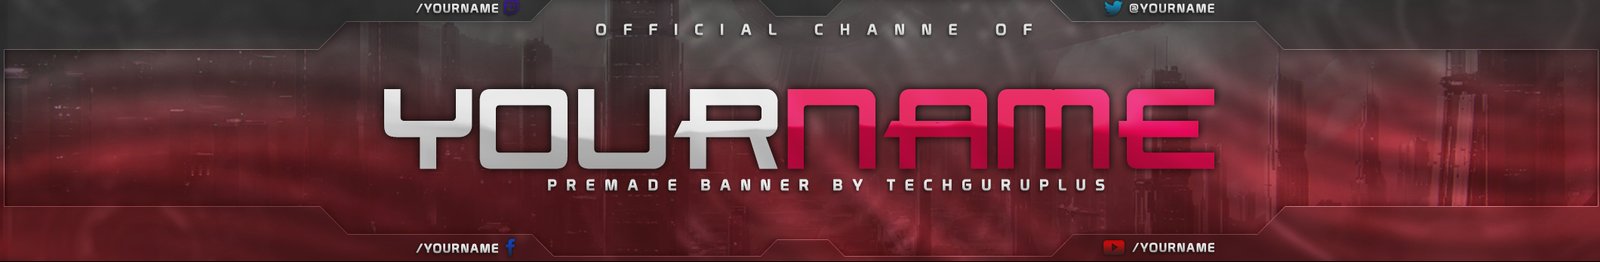 2048x1152 channel art, free youtube banner, youtube banner background, youtube banner template, youtube banner template psd 2016, youtube channel art 2560x1440, youtube channel art gaming, youtube channel art psd 2017, youtube channel art size, youtube channel art template, youtube channel art template download, youtube channel art template maker, youtube channel art template psd, youtube channel art template psd 2017, youtube channel art template size, youtube channel banner template psd free, youtube channel icon maker, youtube gaming channel art template psd,